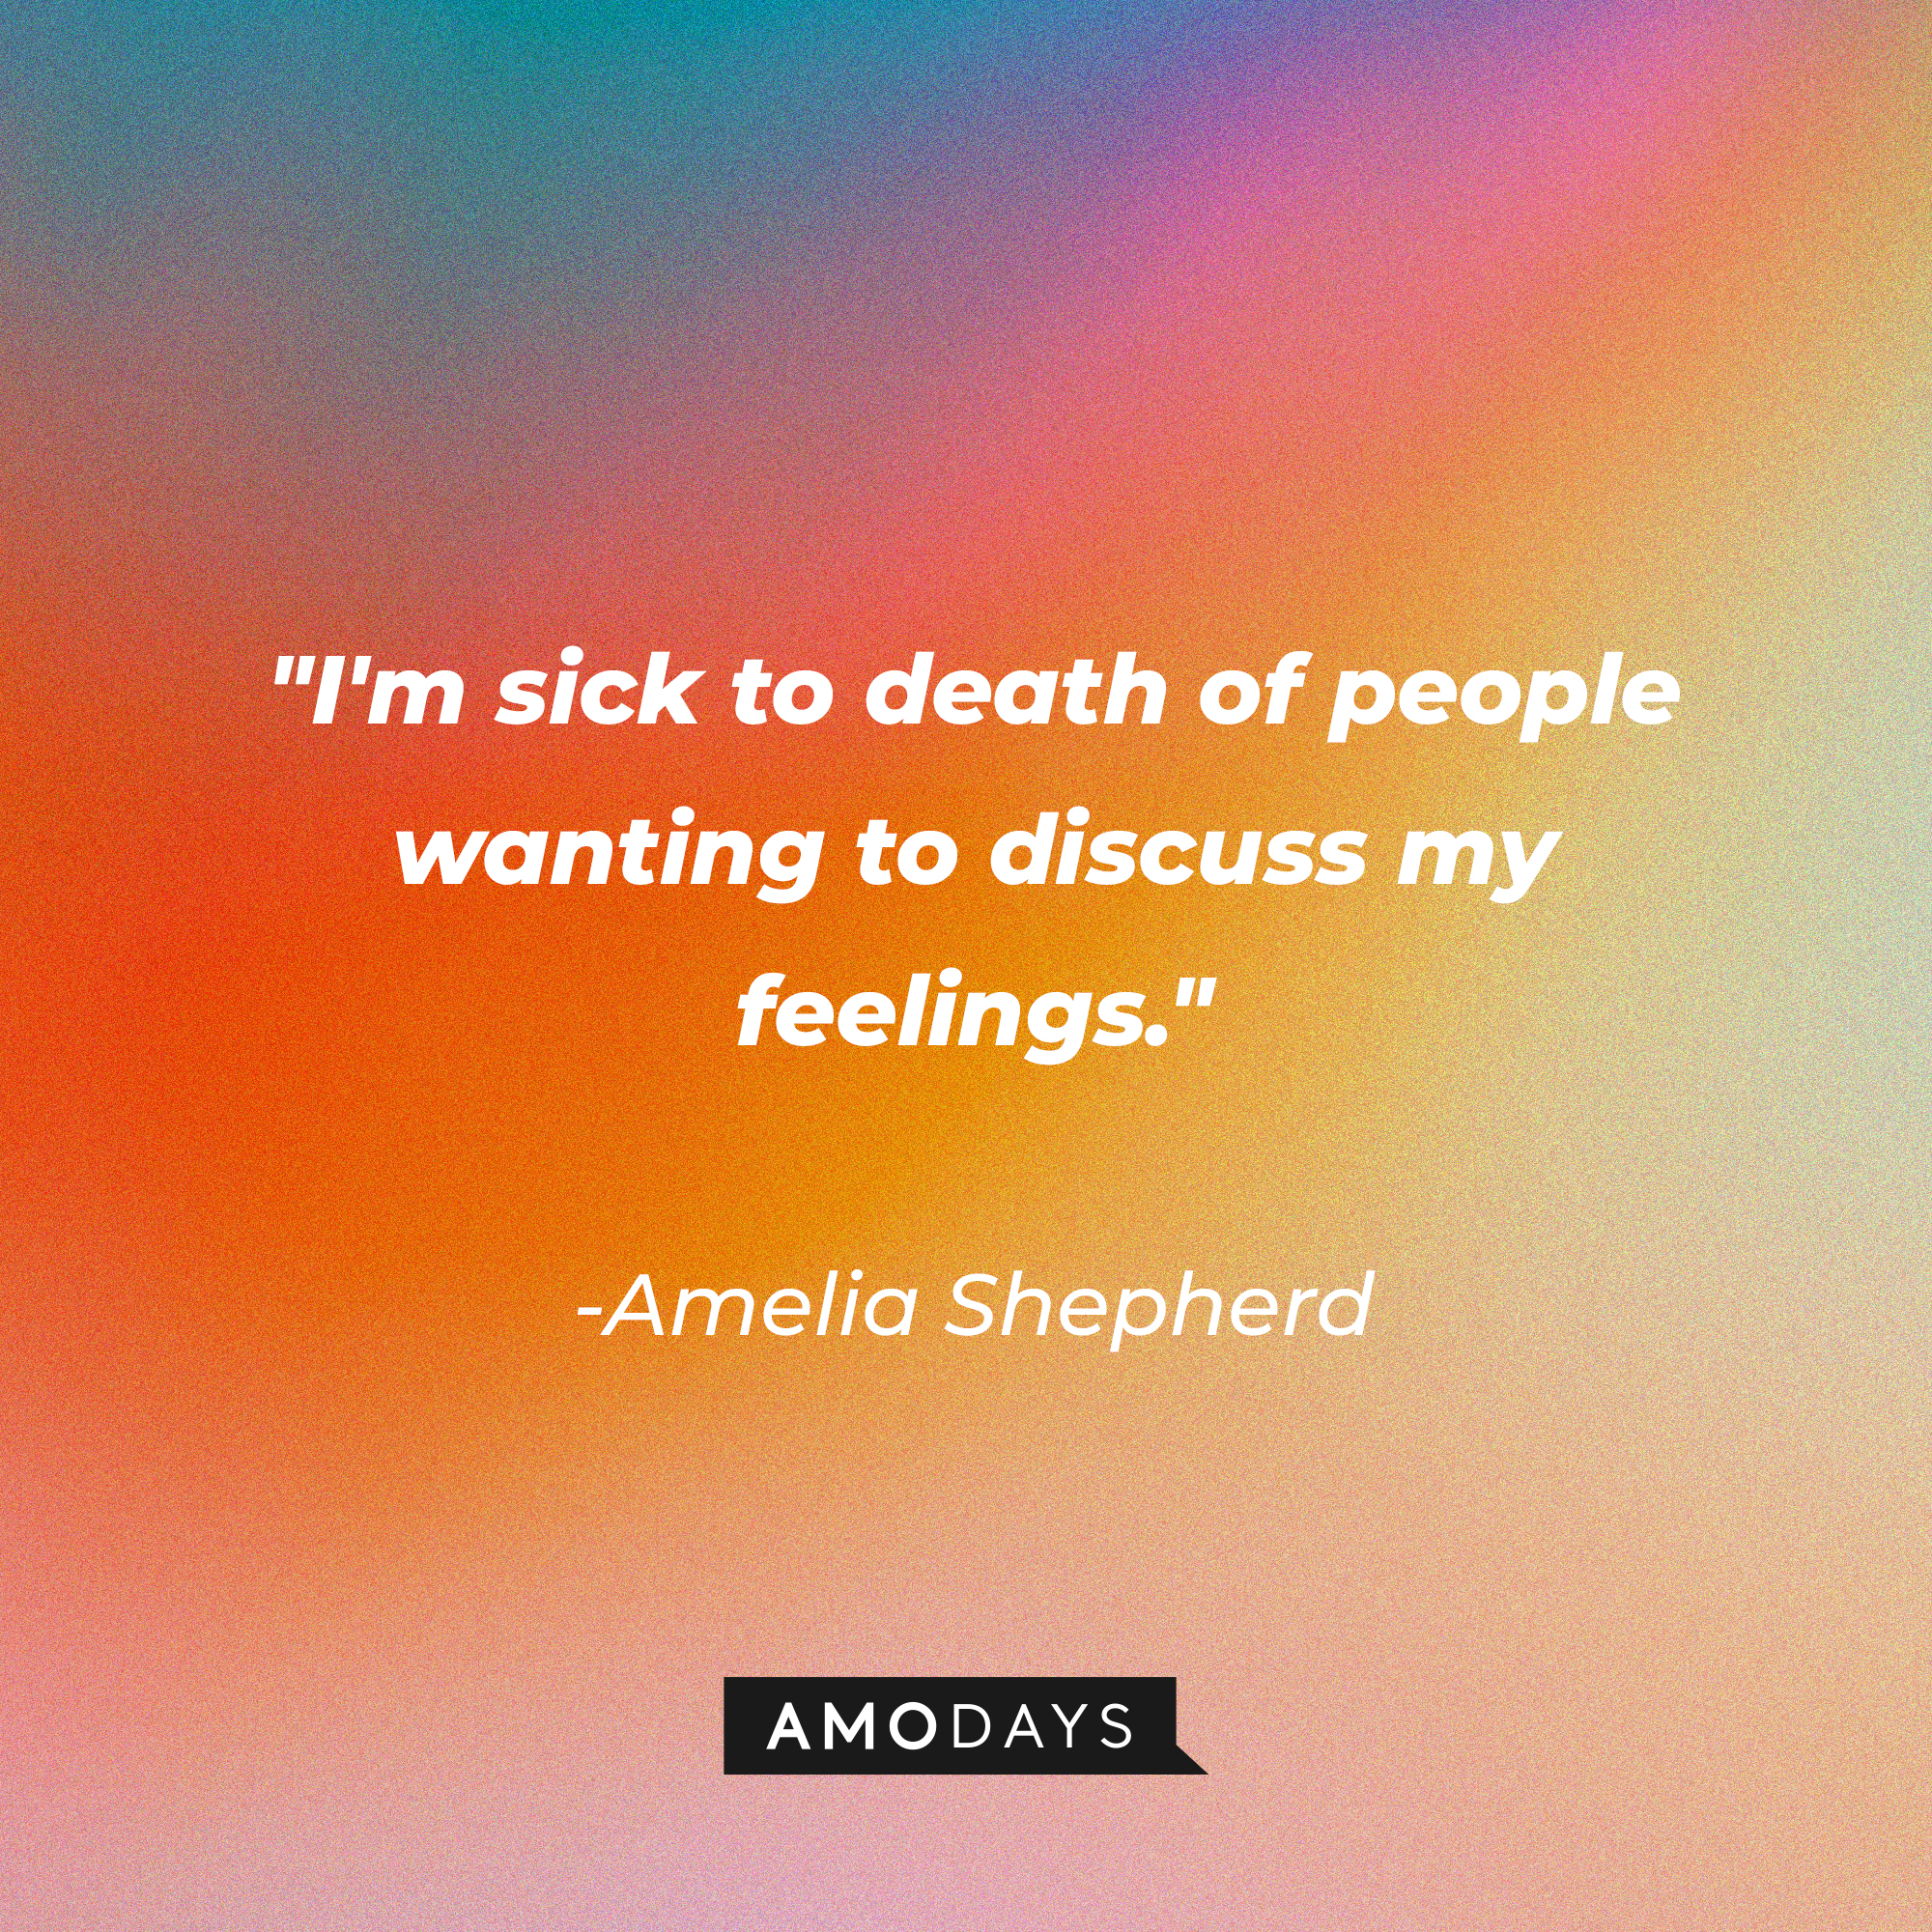 Amelia Shepherd's quote: "I'm sick to death of people wanting to discuss my feelings." | Source: AmoDays